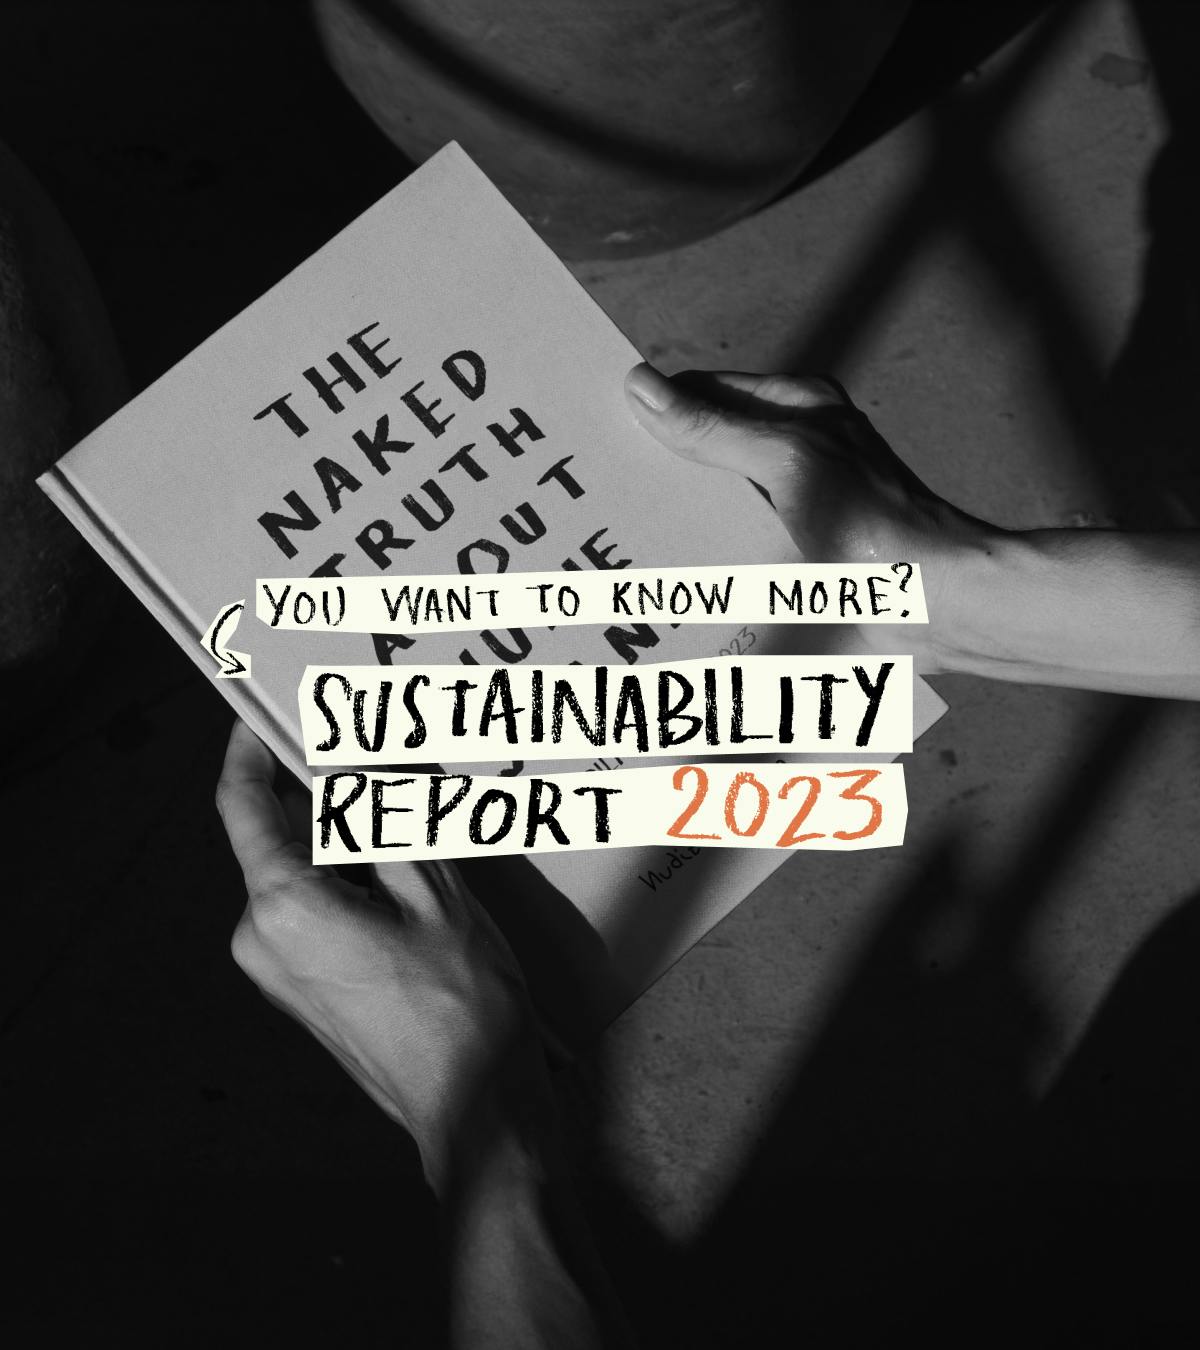 Nudie-jeans-sustainability-report-2023